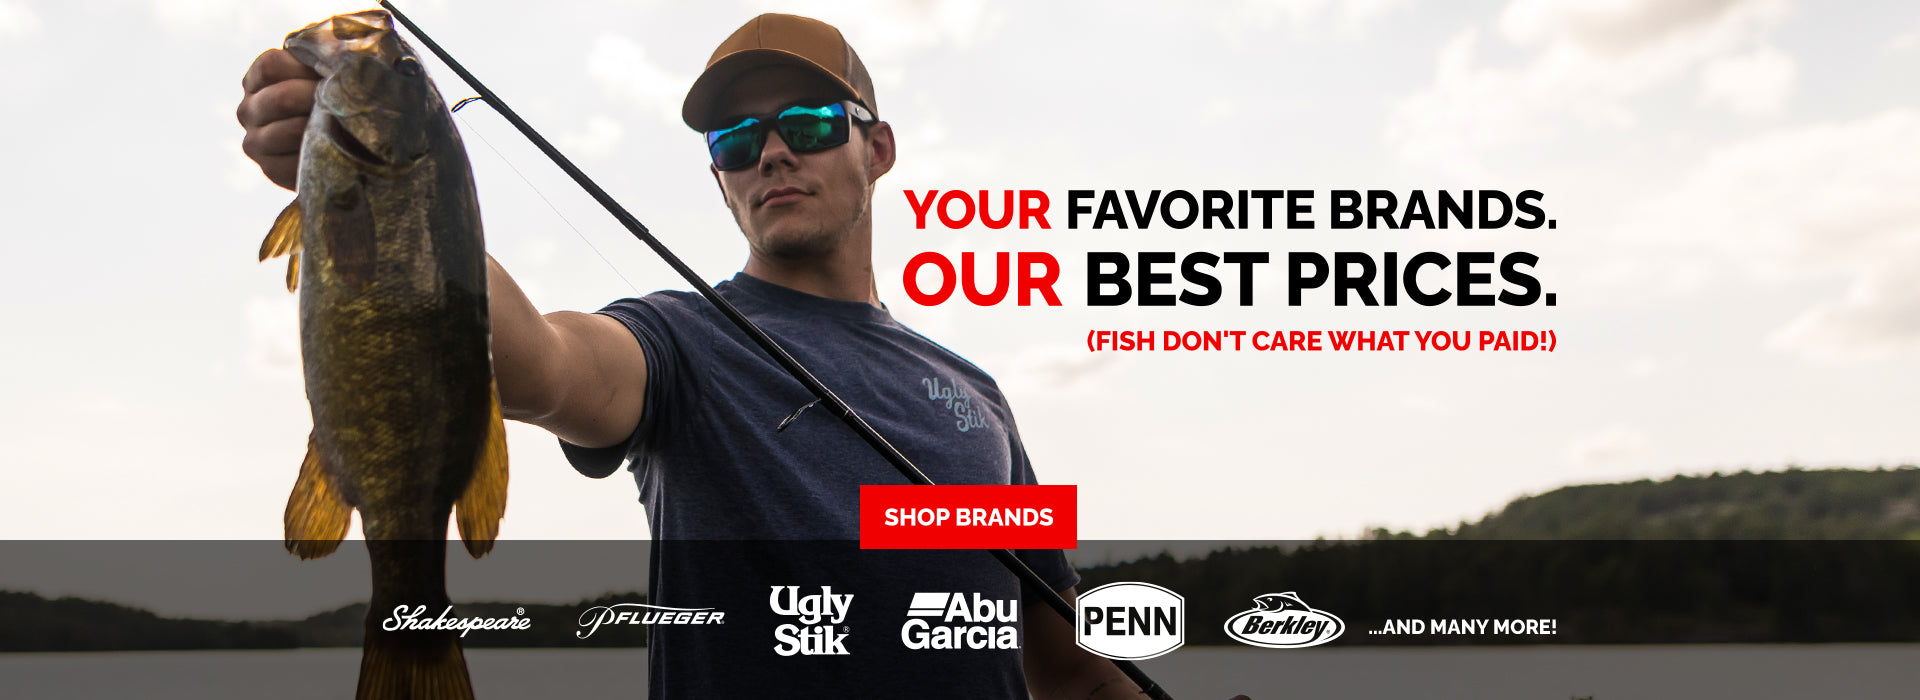 Your Favorite Brands. Our Best Prices.